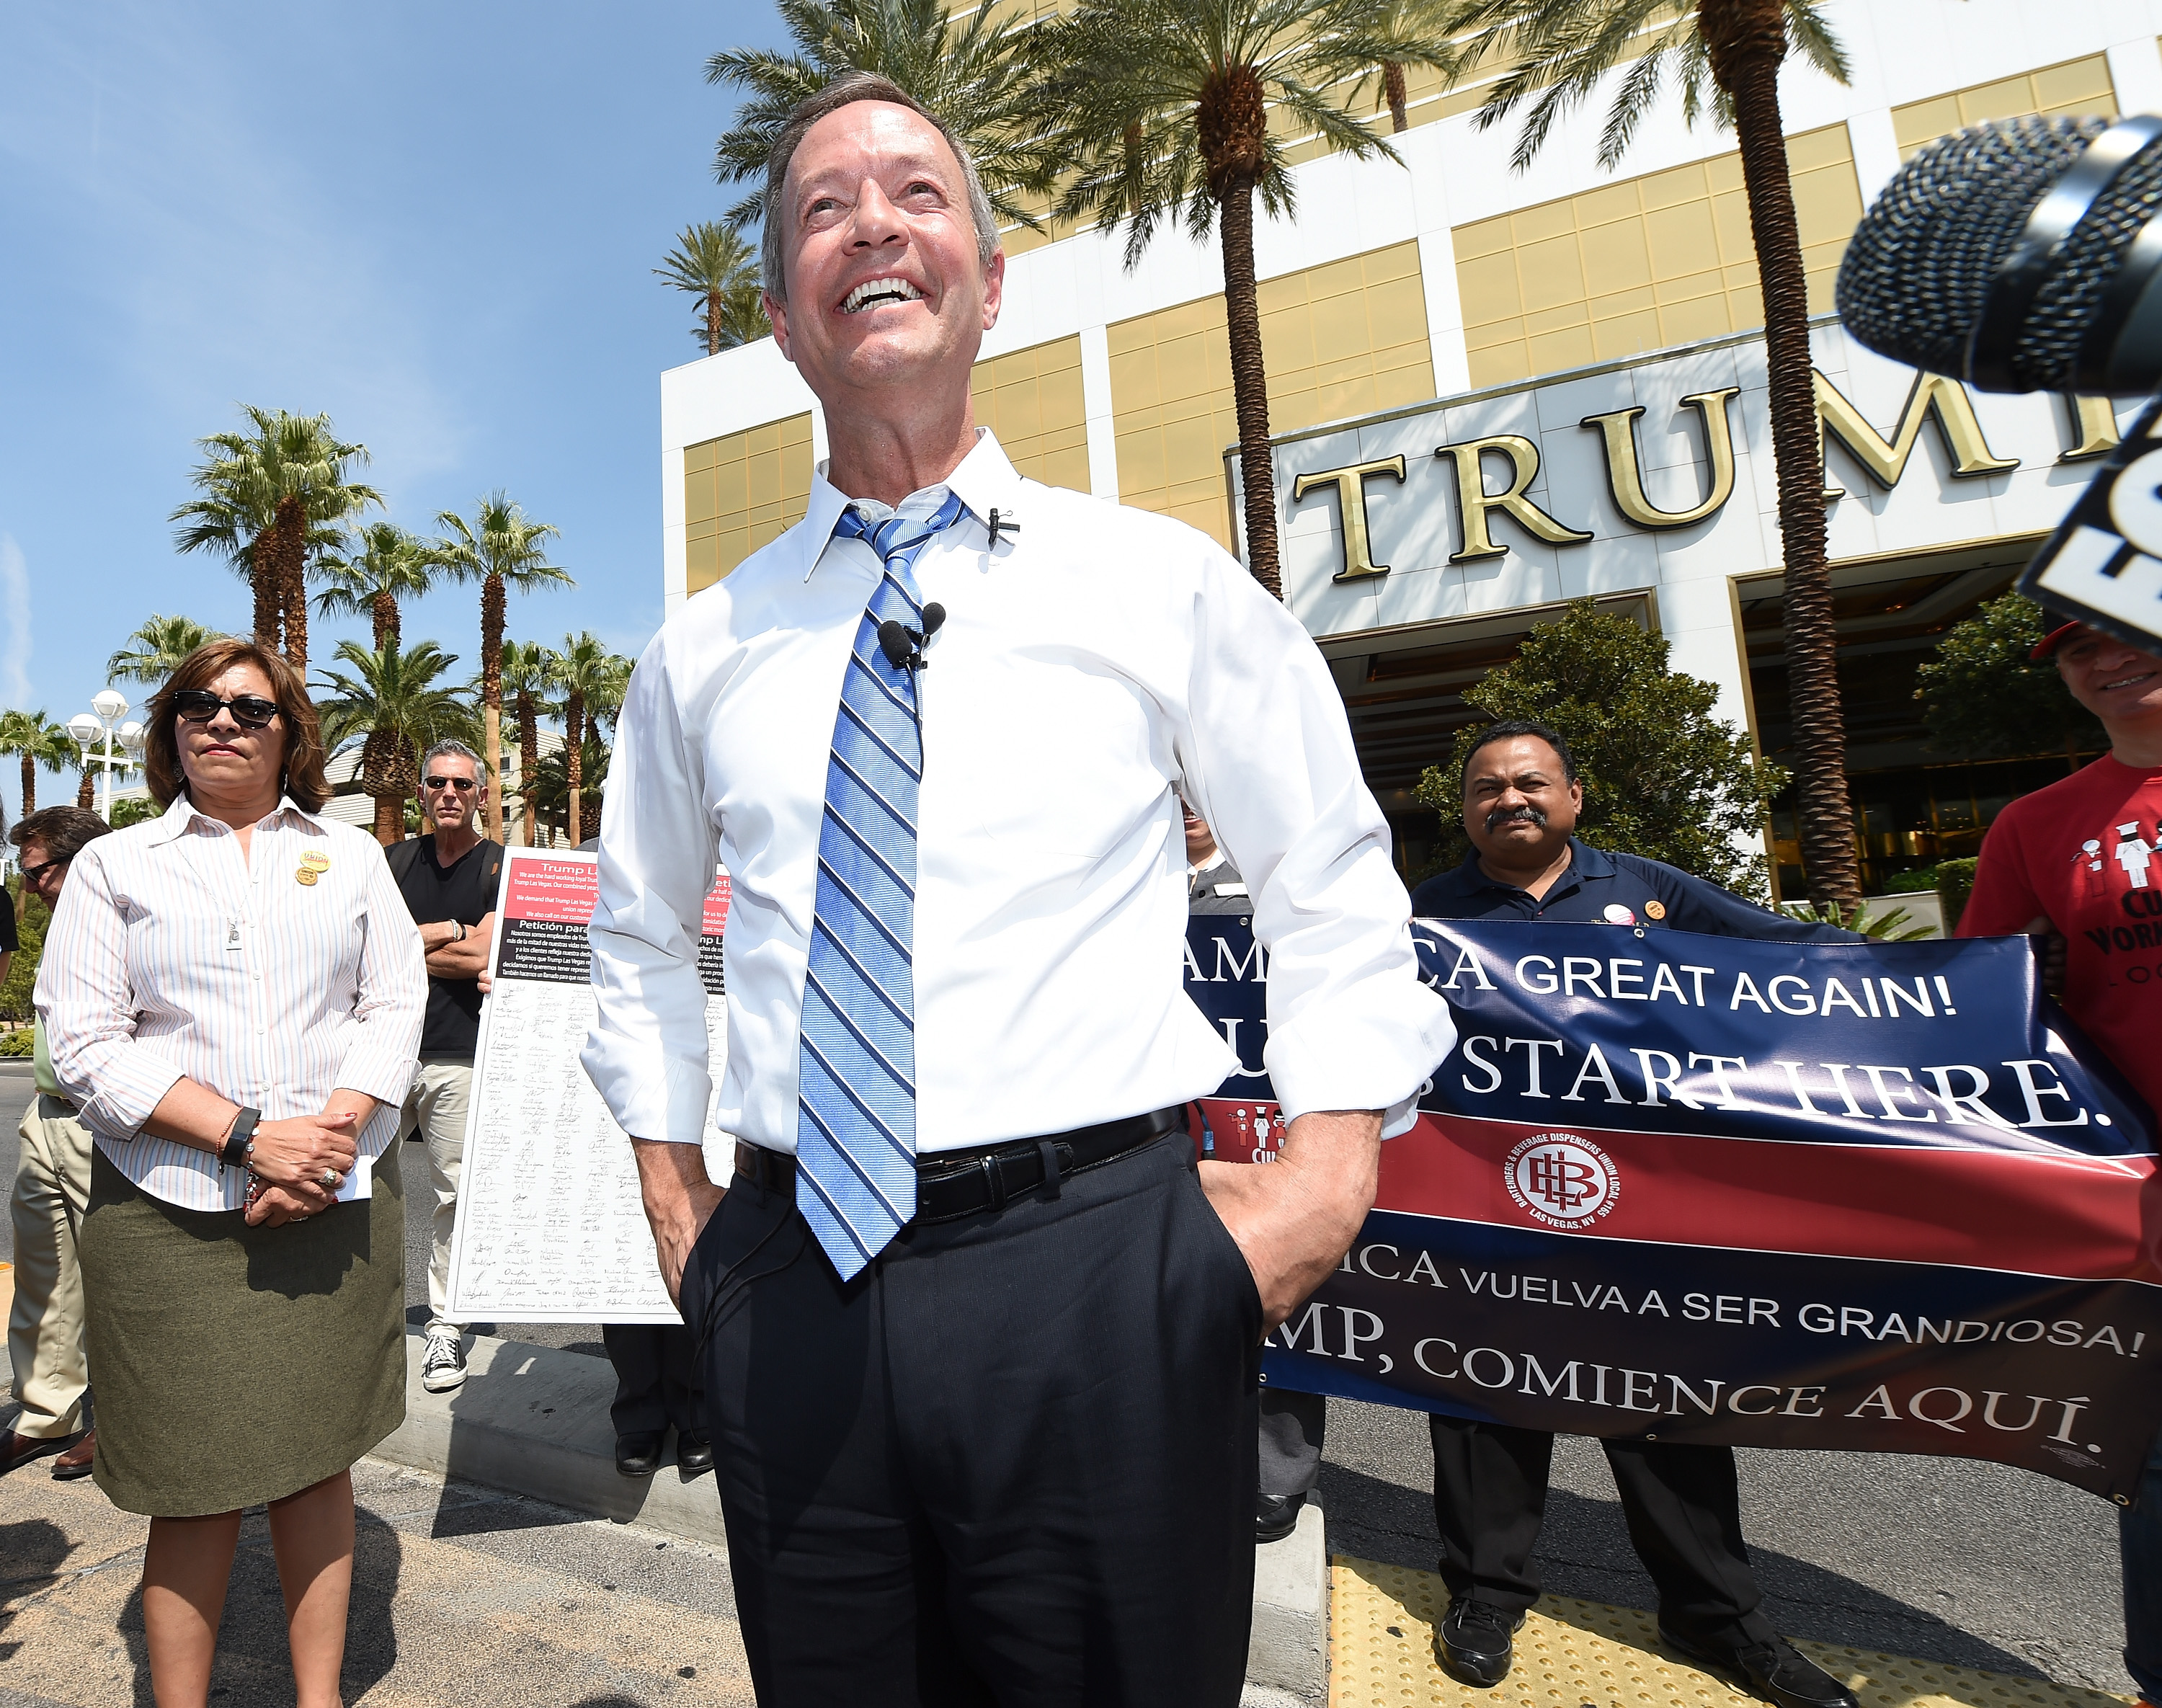 Democratic presidential candidate Martin O'Malley speaks while standing in a median in front of the Trump International Hotel &amp; Tower Las Vegas on August 19, 2015 in Las Vegas, Nevada. (Ethan Miller&mdash;Getty Images)